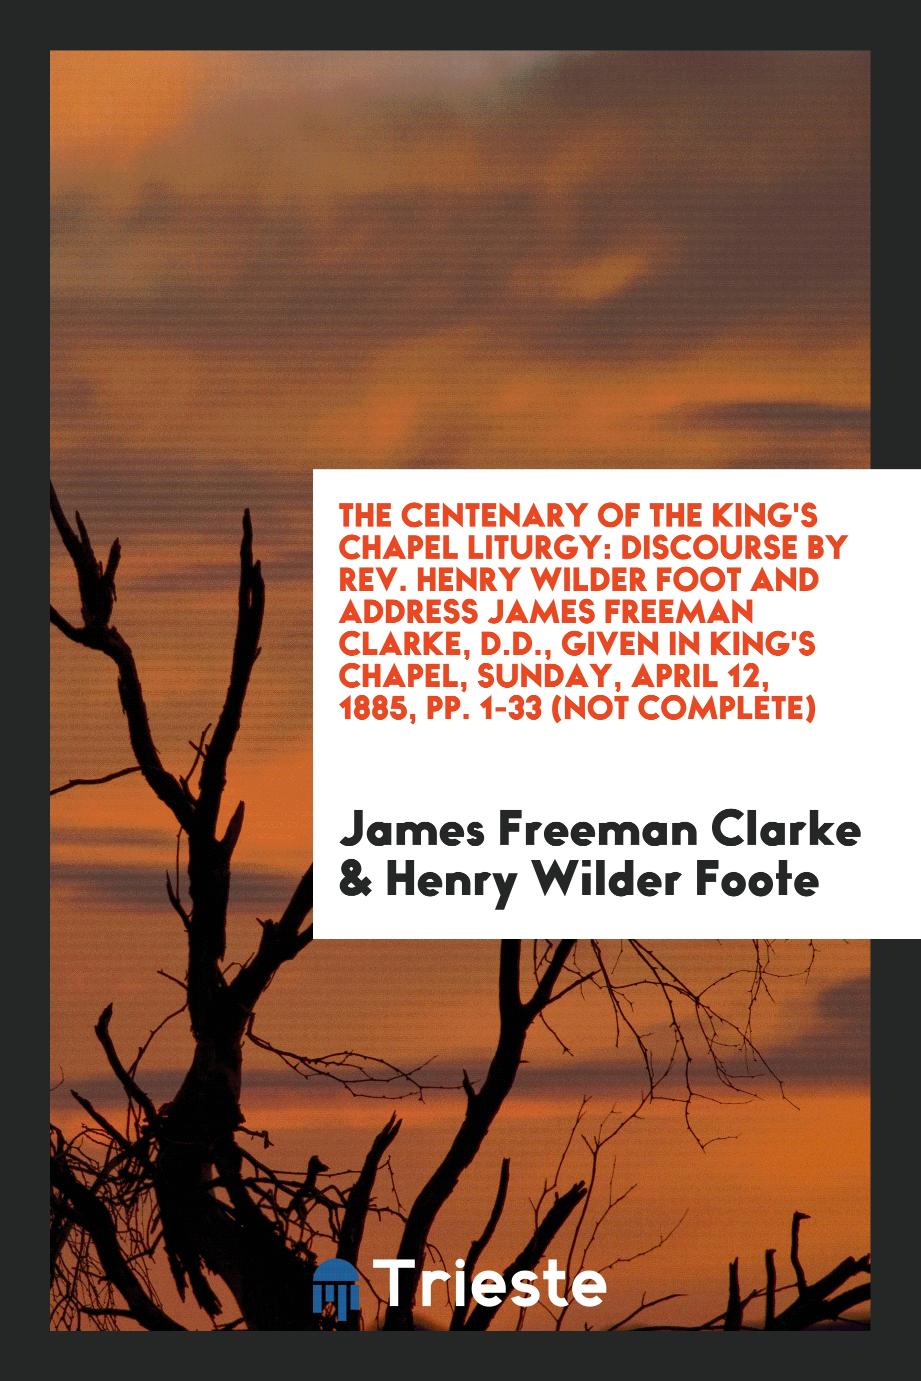 The Centenary of the King's Chapel Liturgy: Discourse by Rev. Henry Wilder Foot and address James Freeman Clarke, D.D., given in king's Chapel, Sunday, April 12, 1885, pp. 1-33 (not complete)